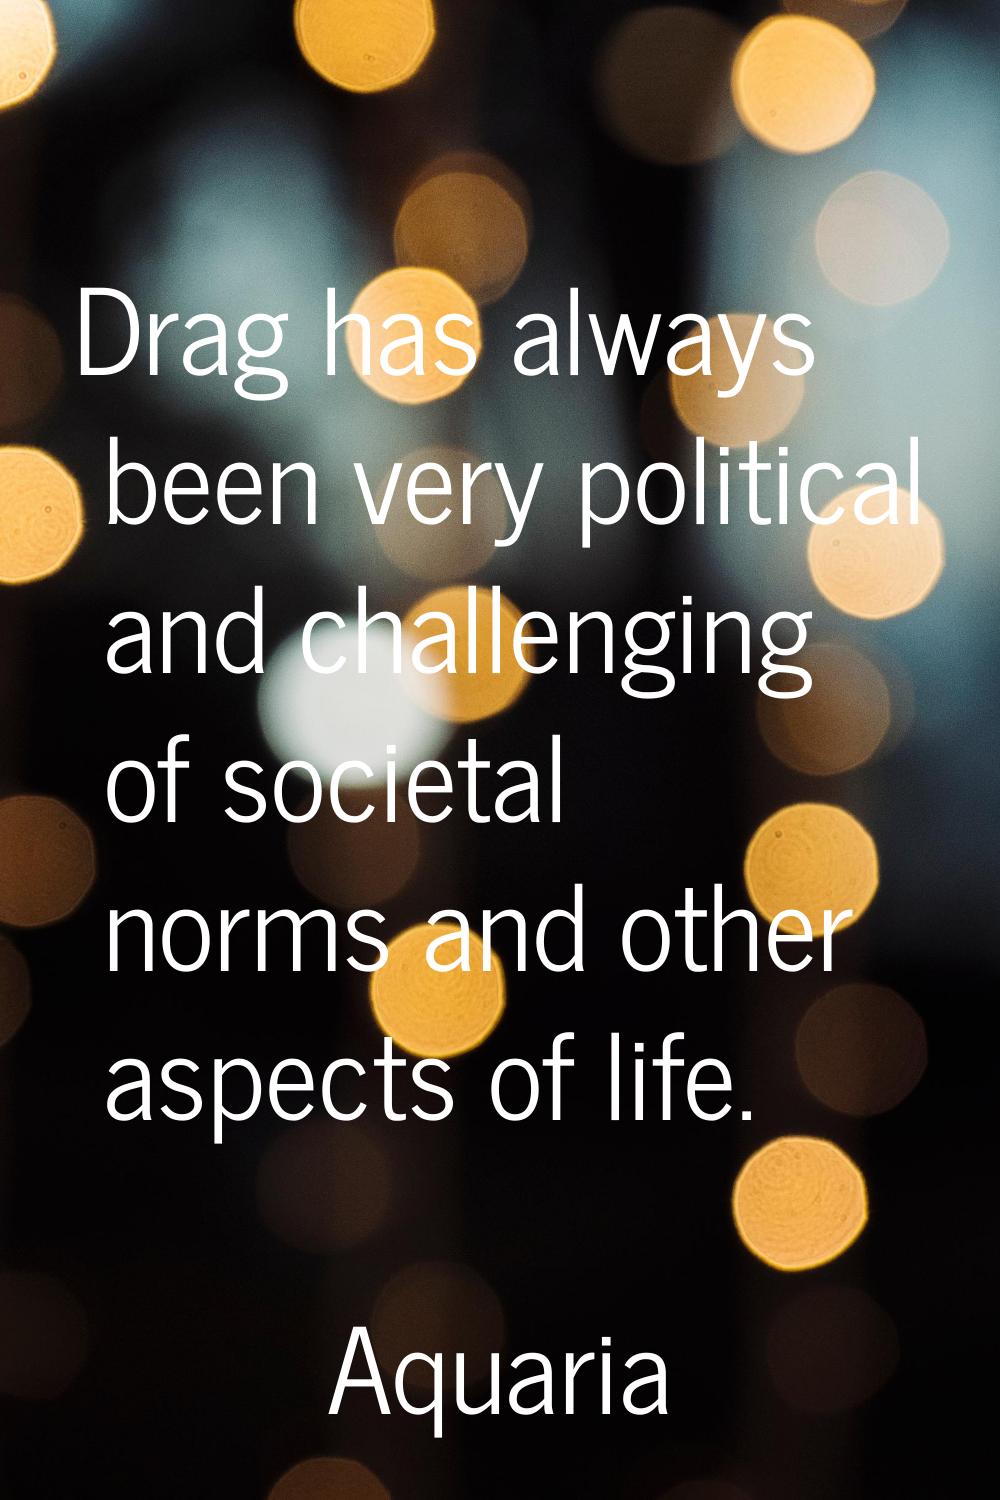 Drag has always been very political and challenging of societal norms and other aspects of life.